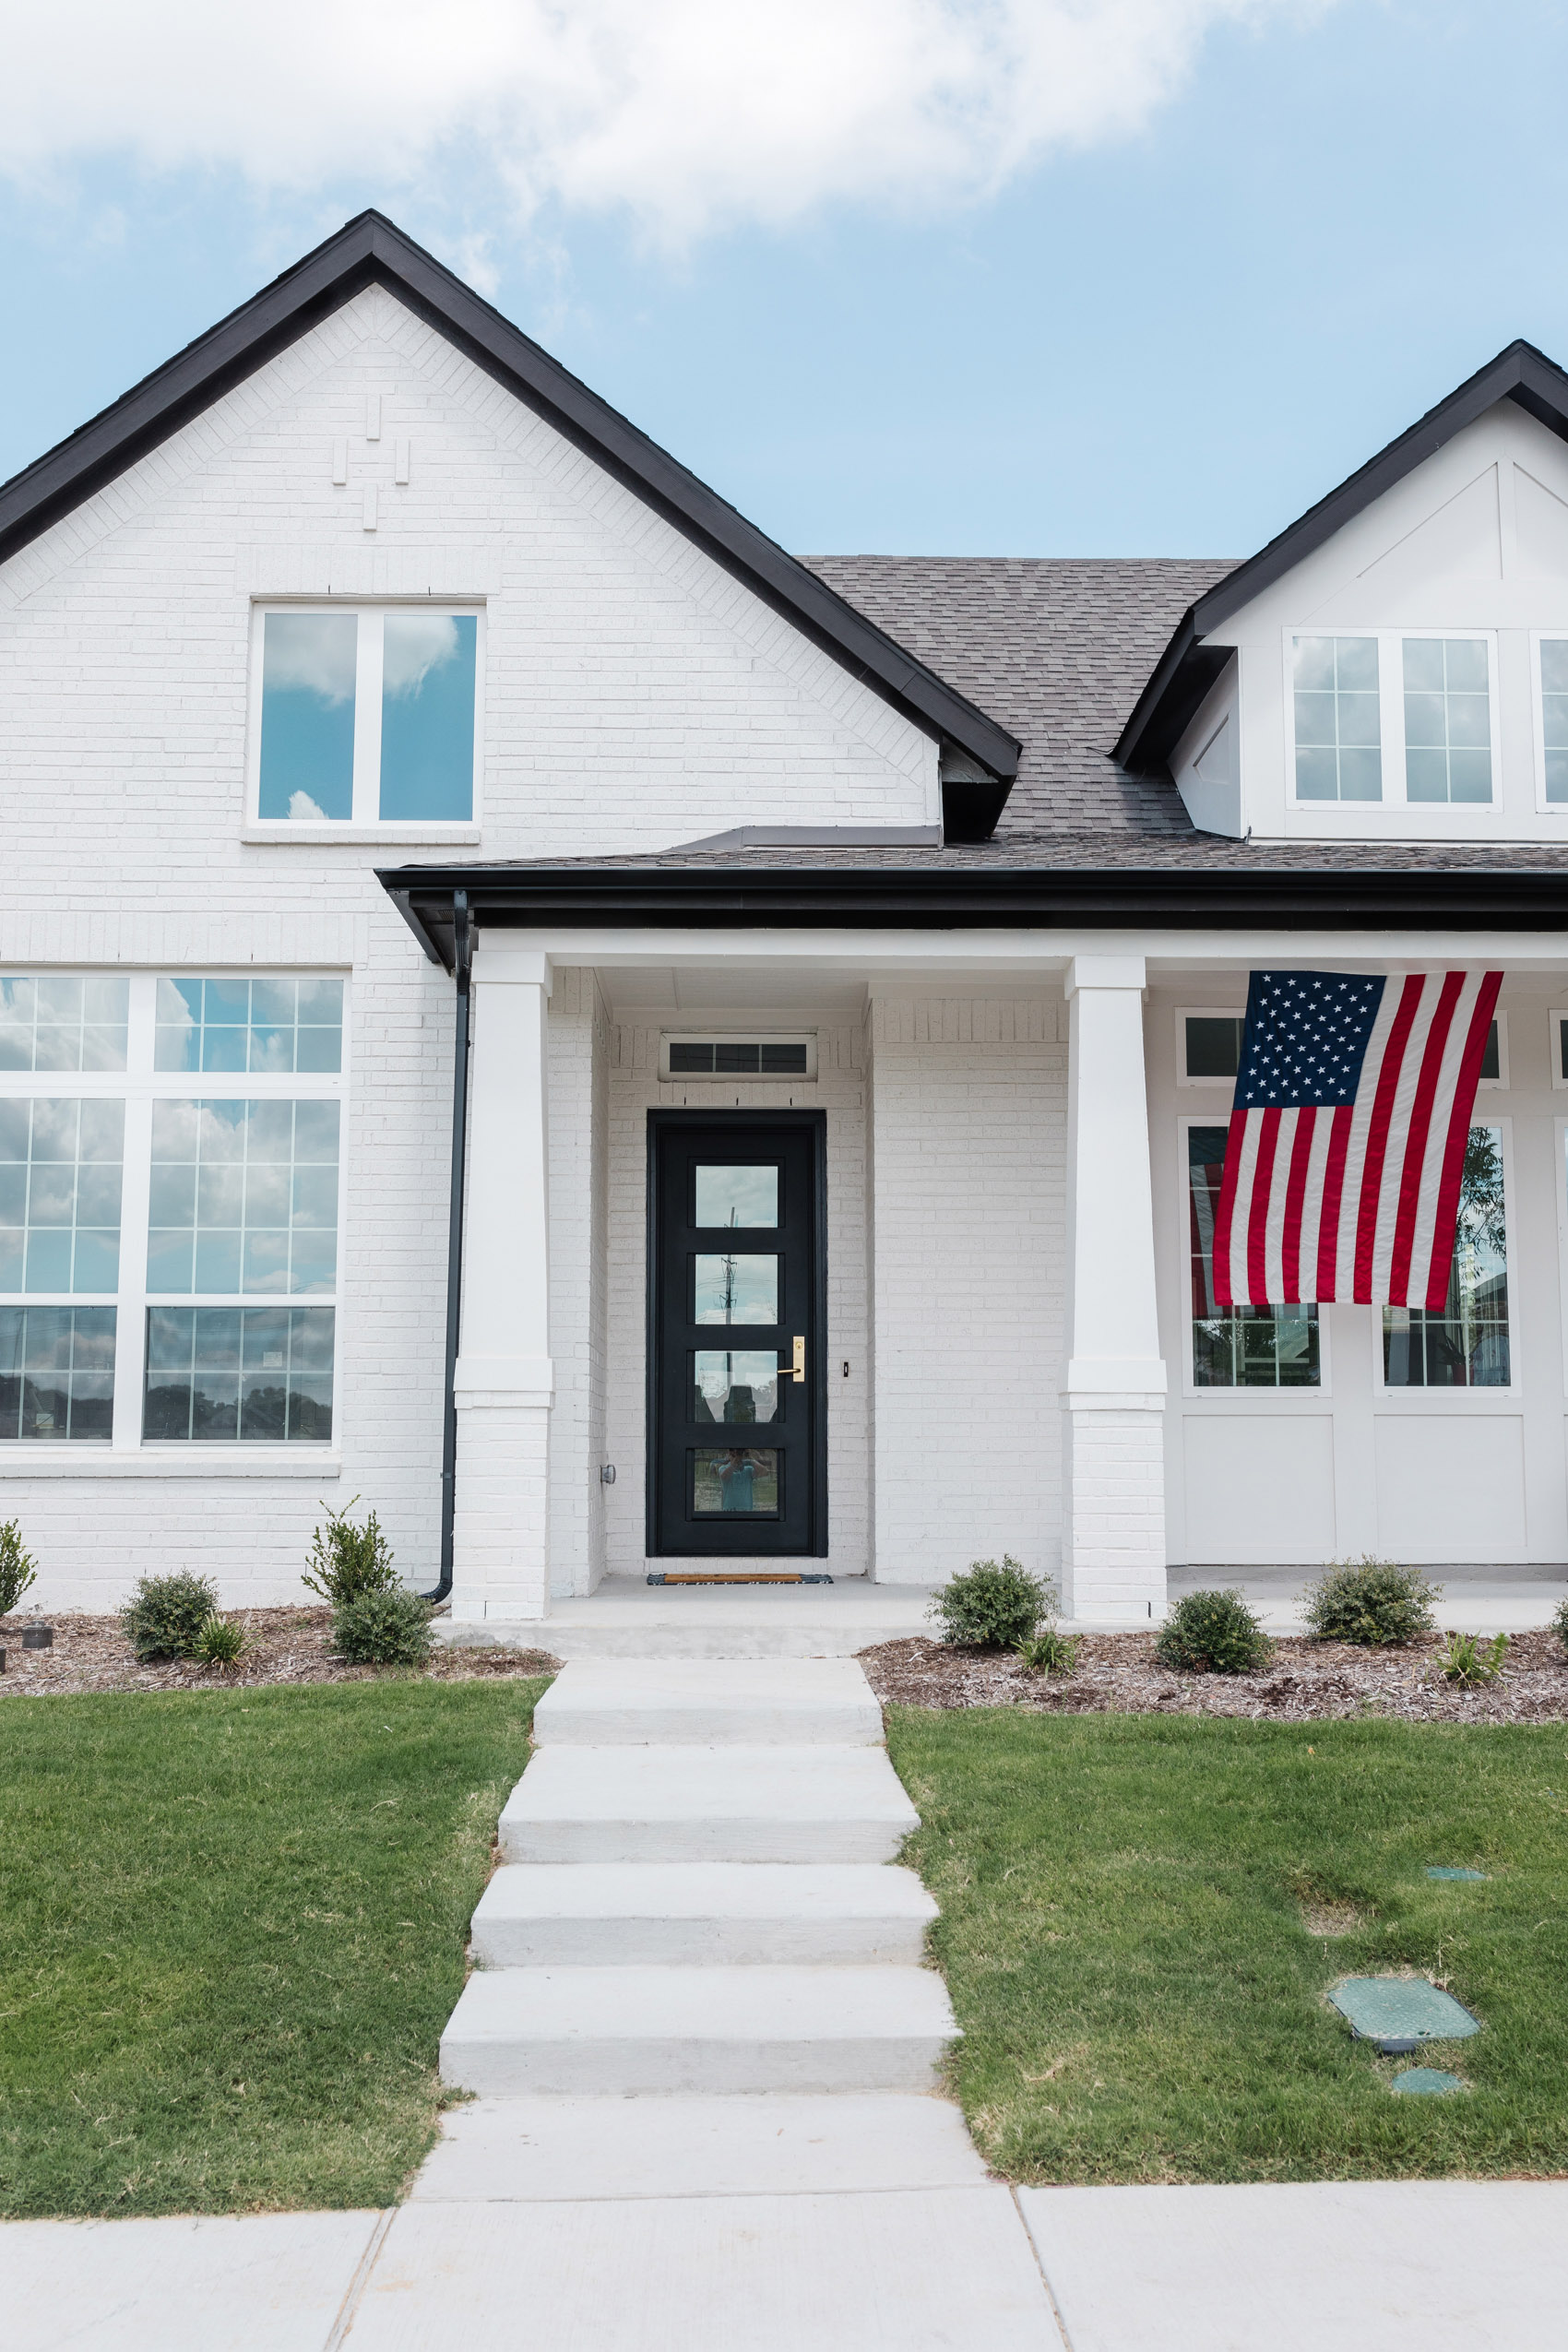 Transitional home with an iron front door, white painted brick, black trim and American flag on the front porch